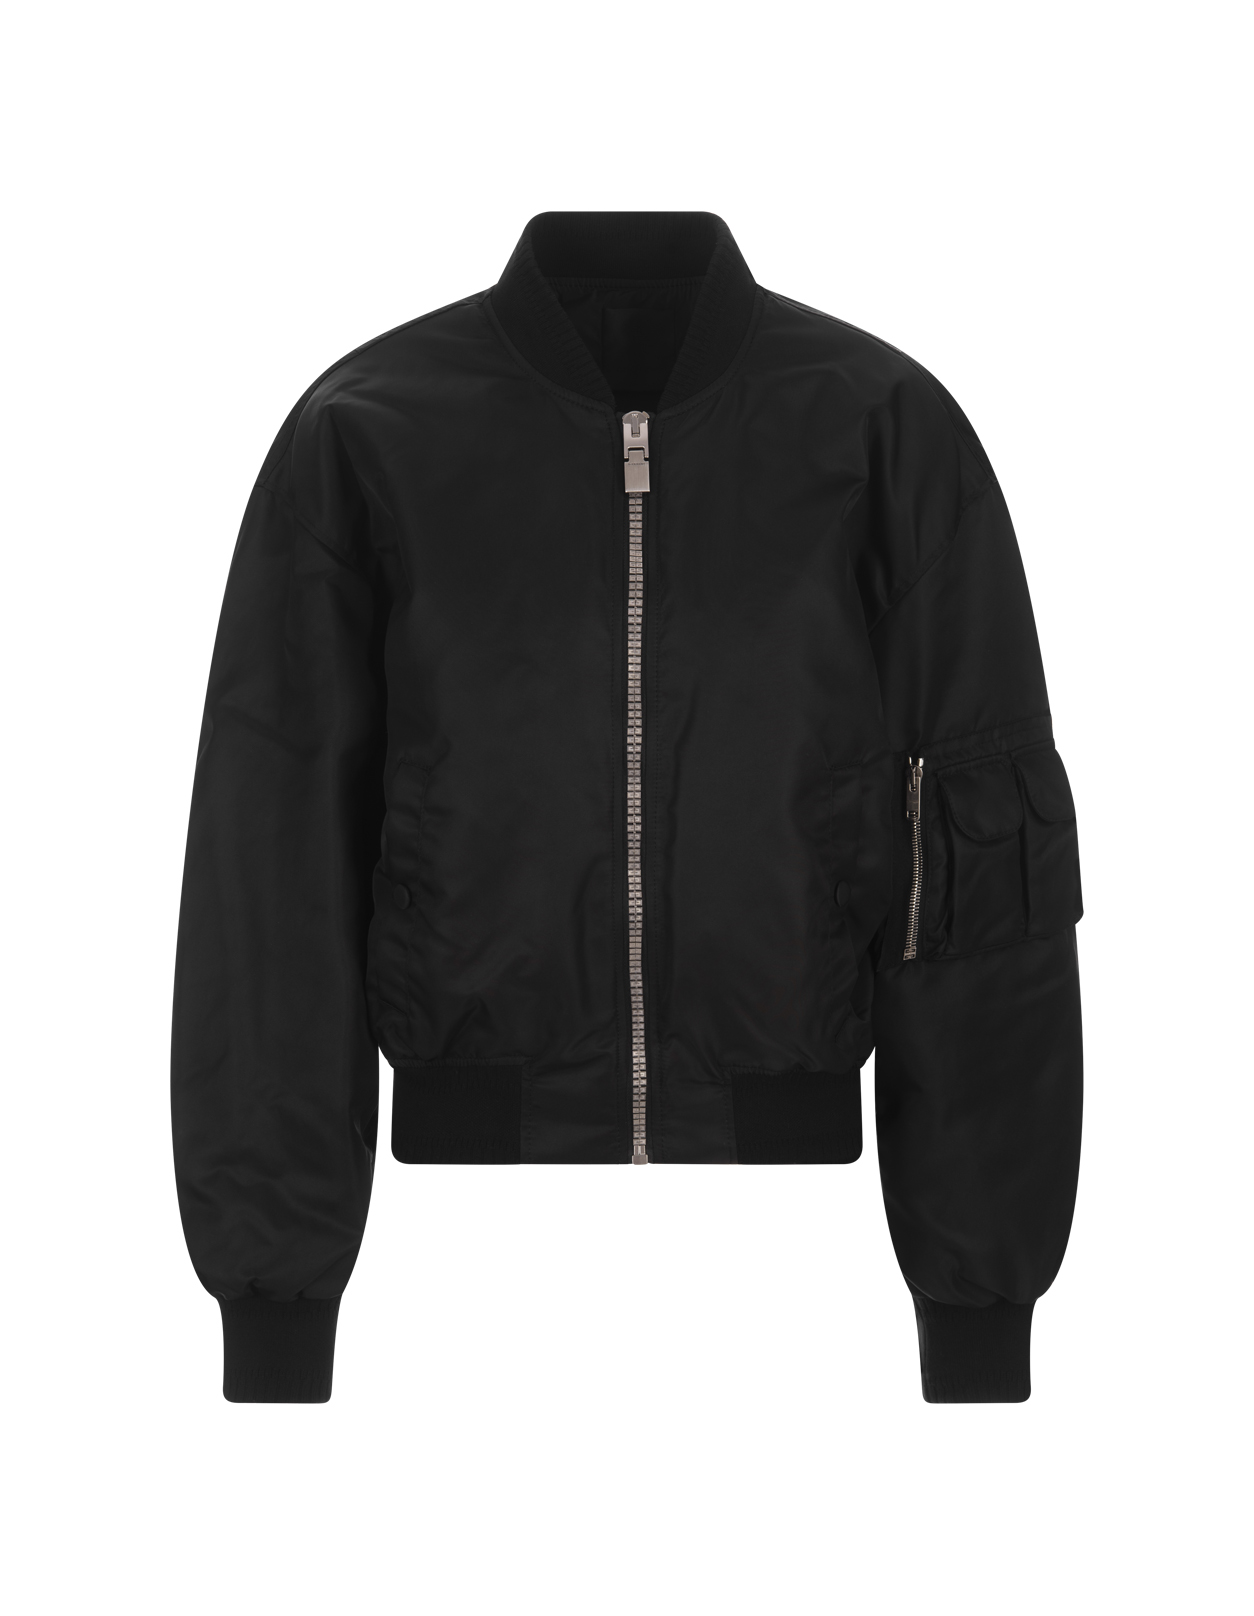 Bomber GIVENCHY Nero Con Dettaglio Tasca GIVENCHY | BW00HG1YCL001